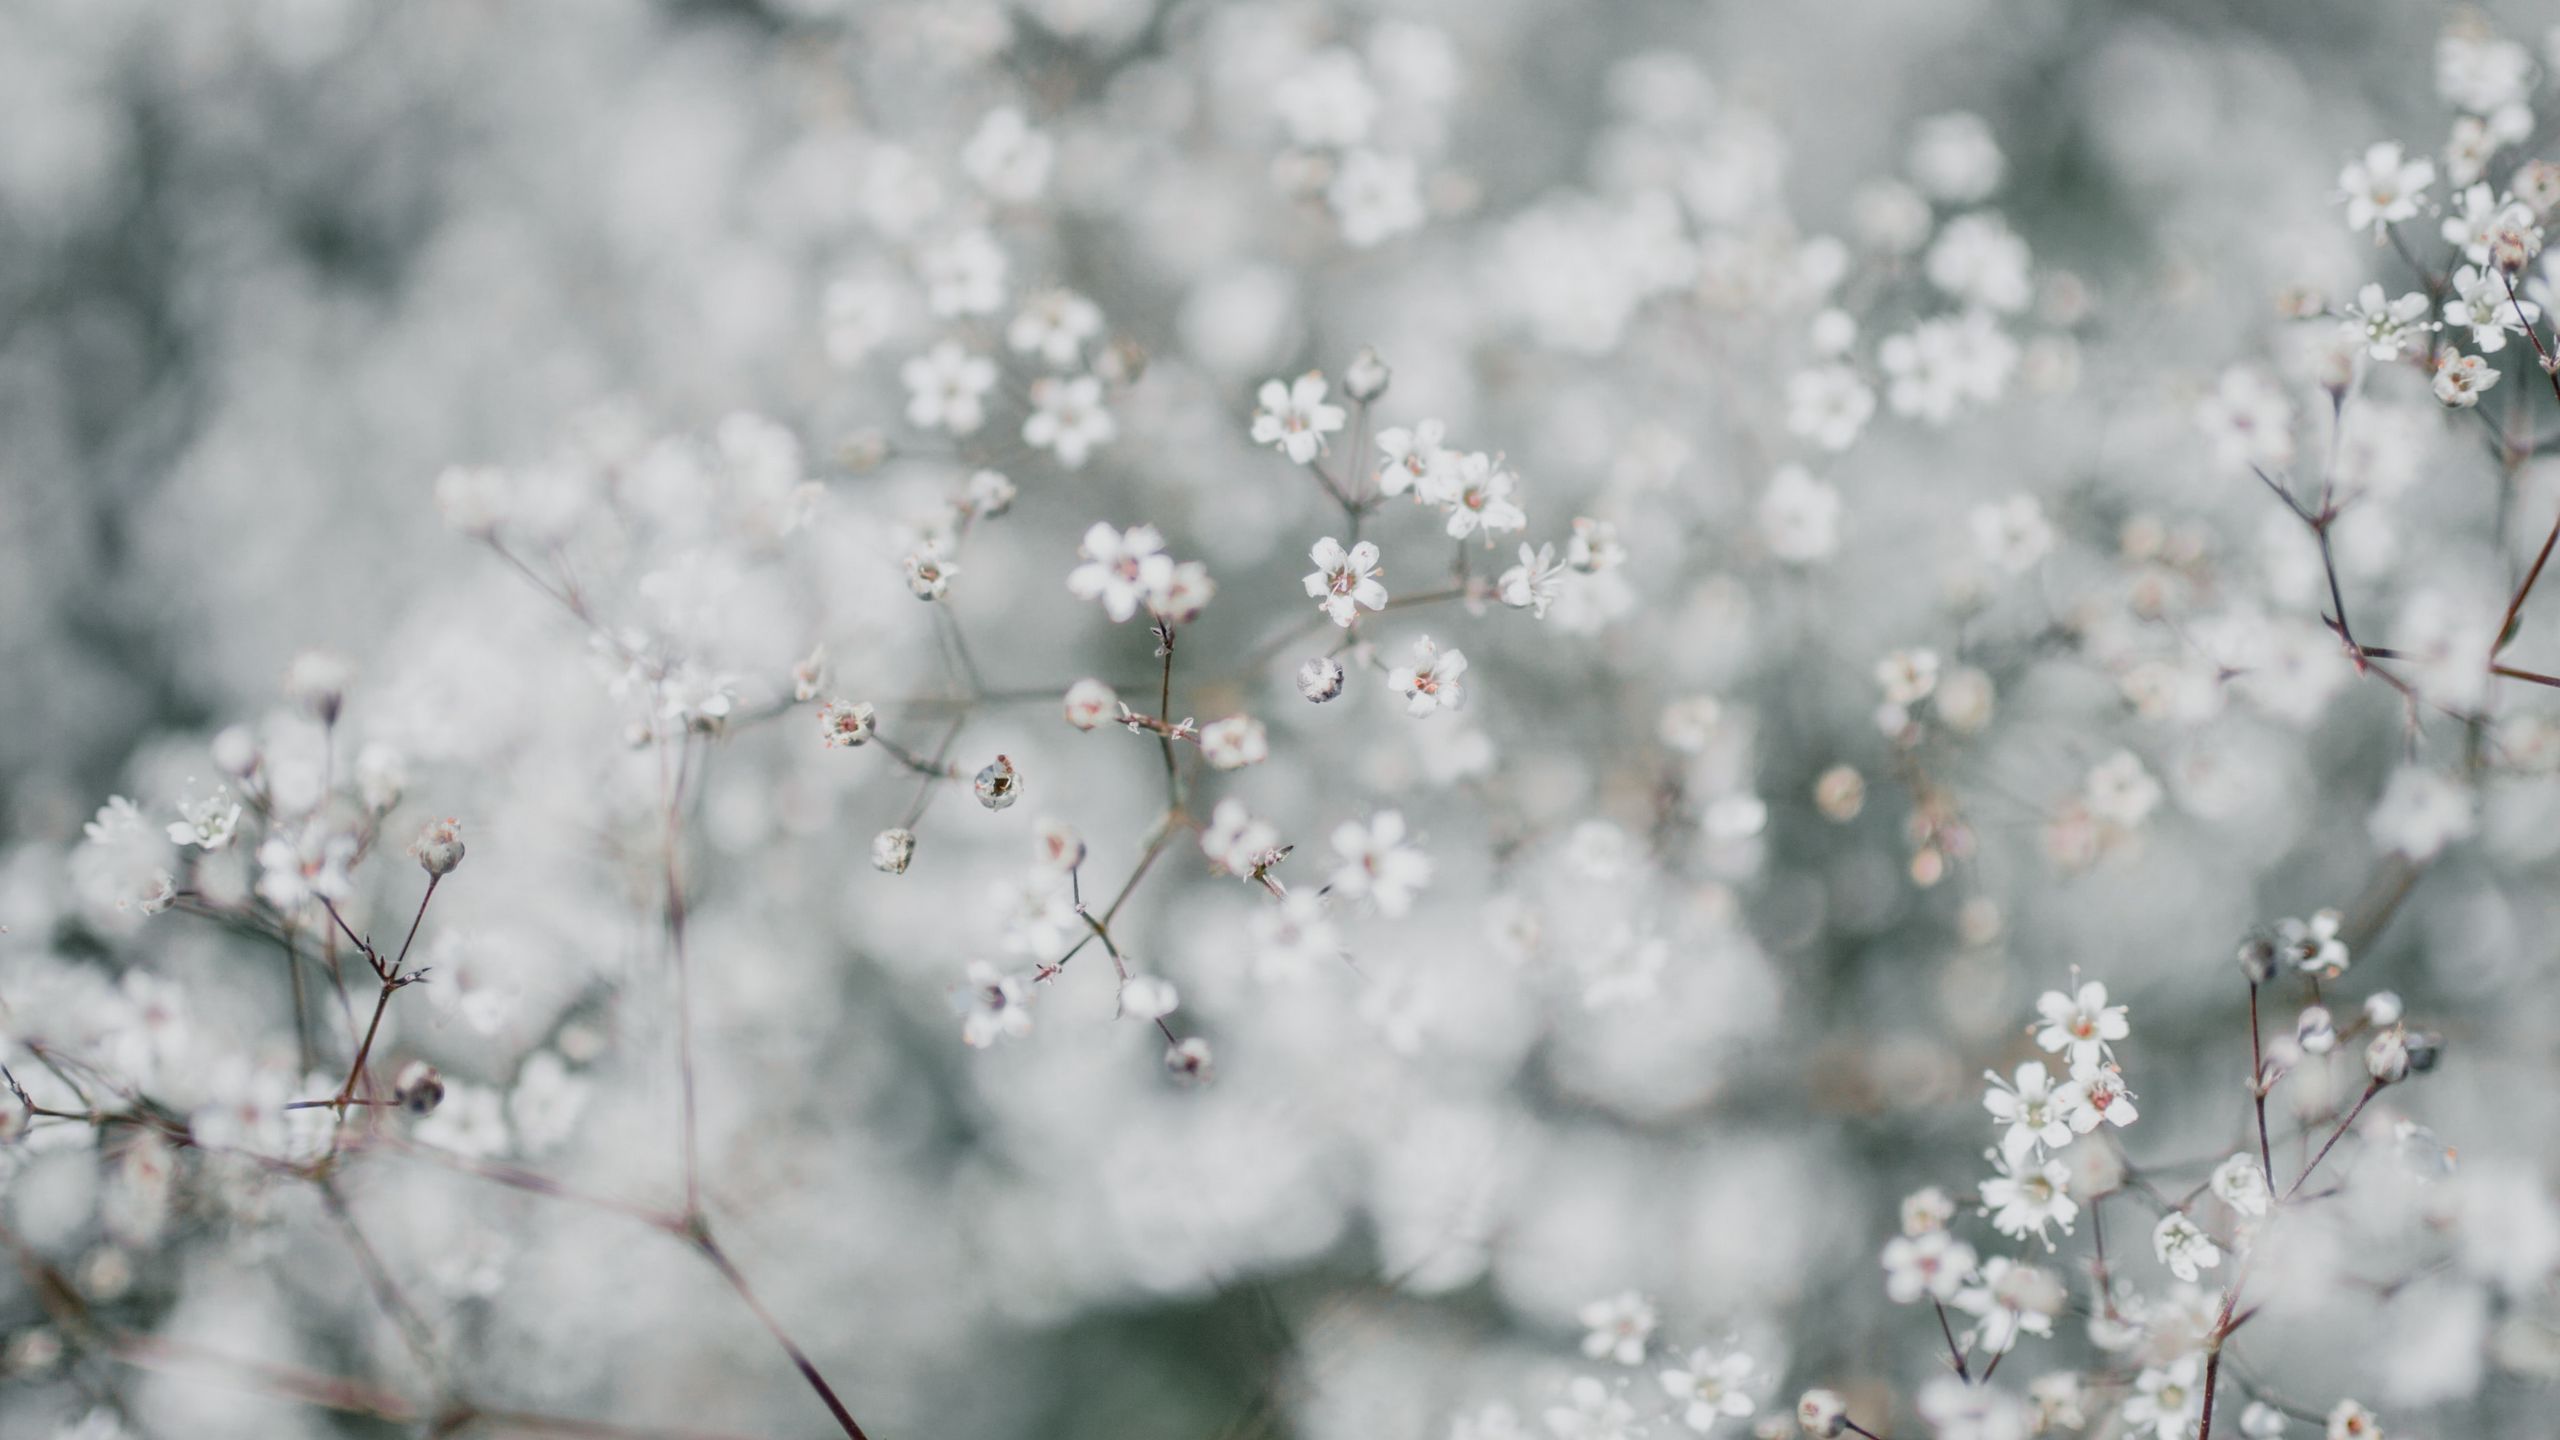 682 Common Gypsophila Royalty-Free Photos and Stock Images | Shutterstock